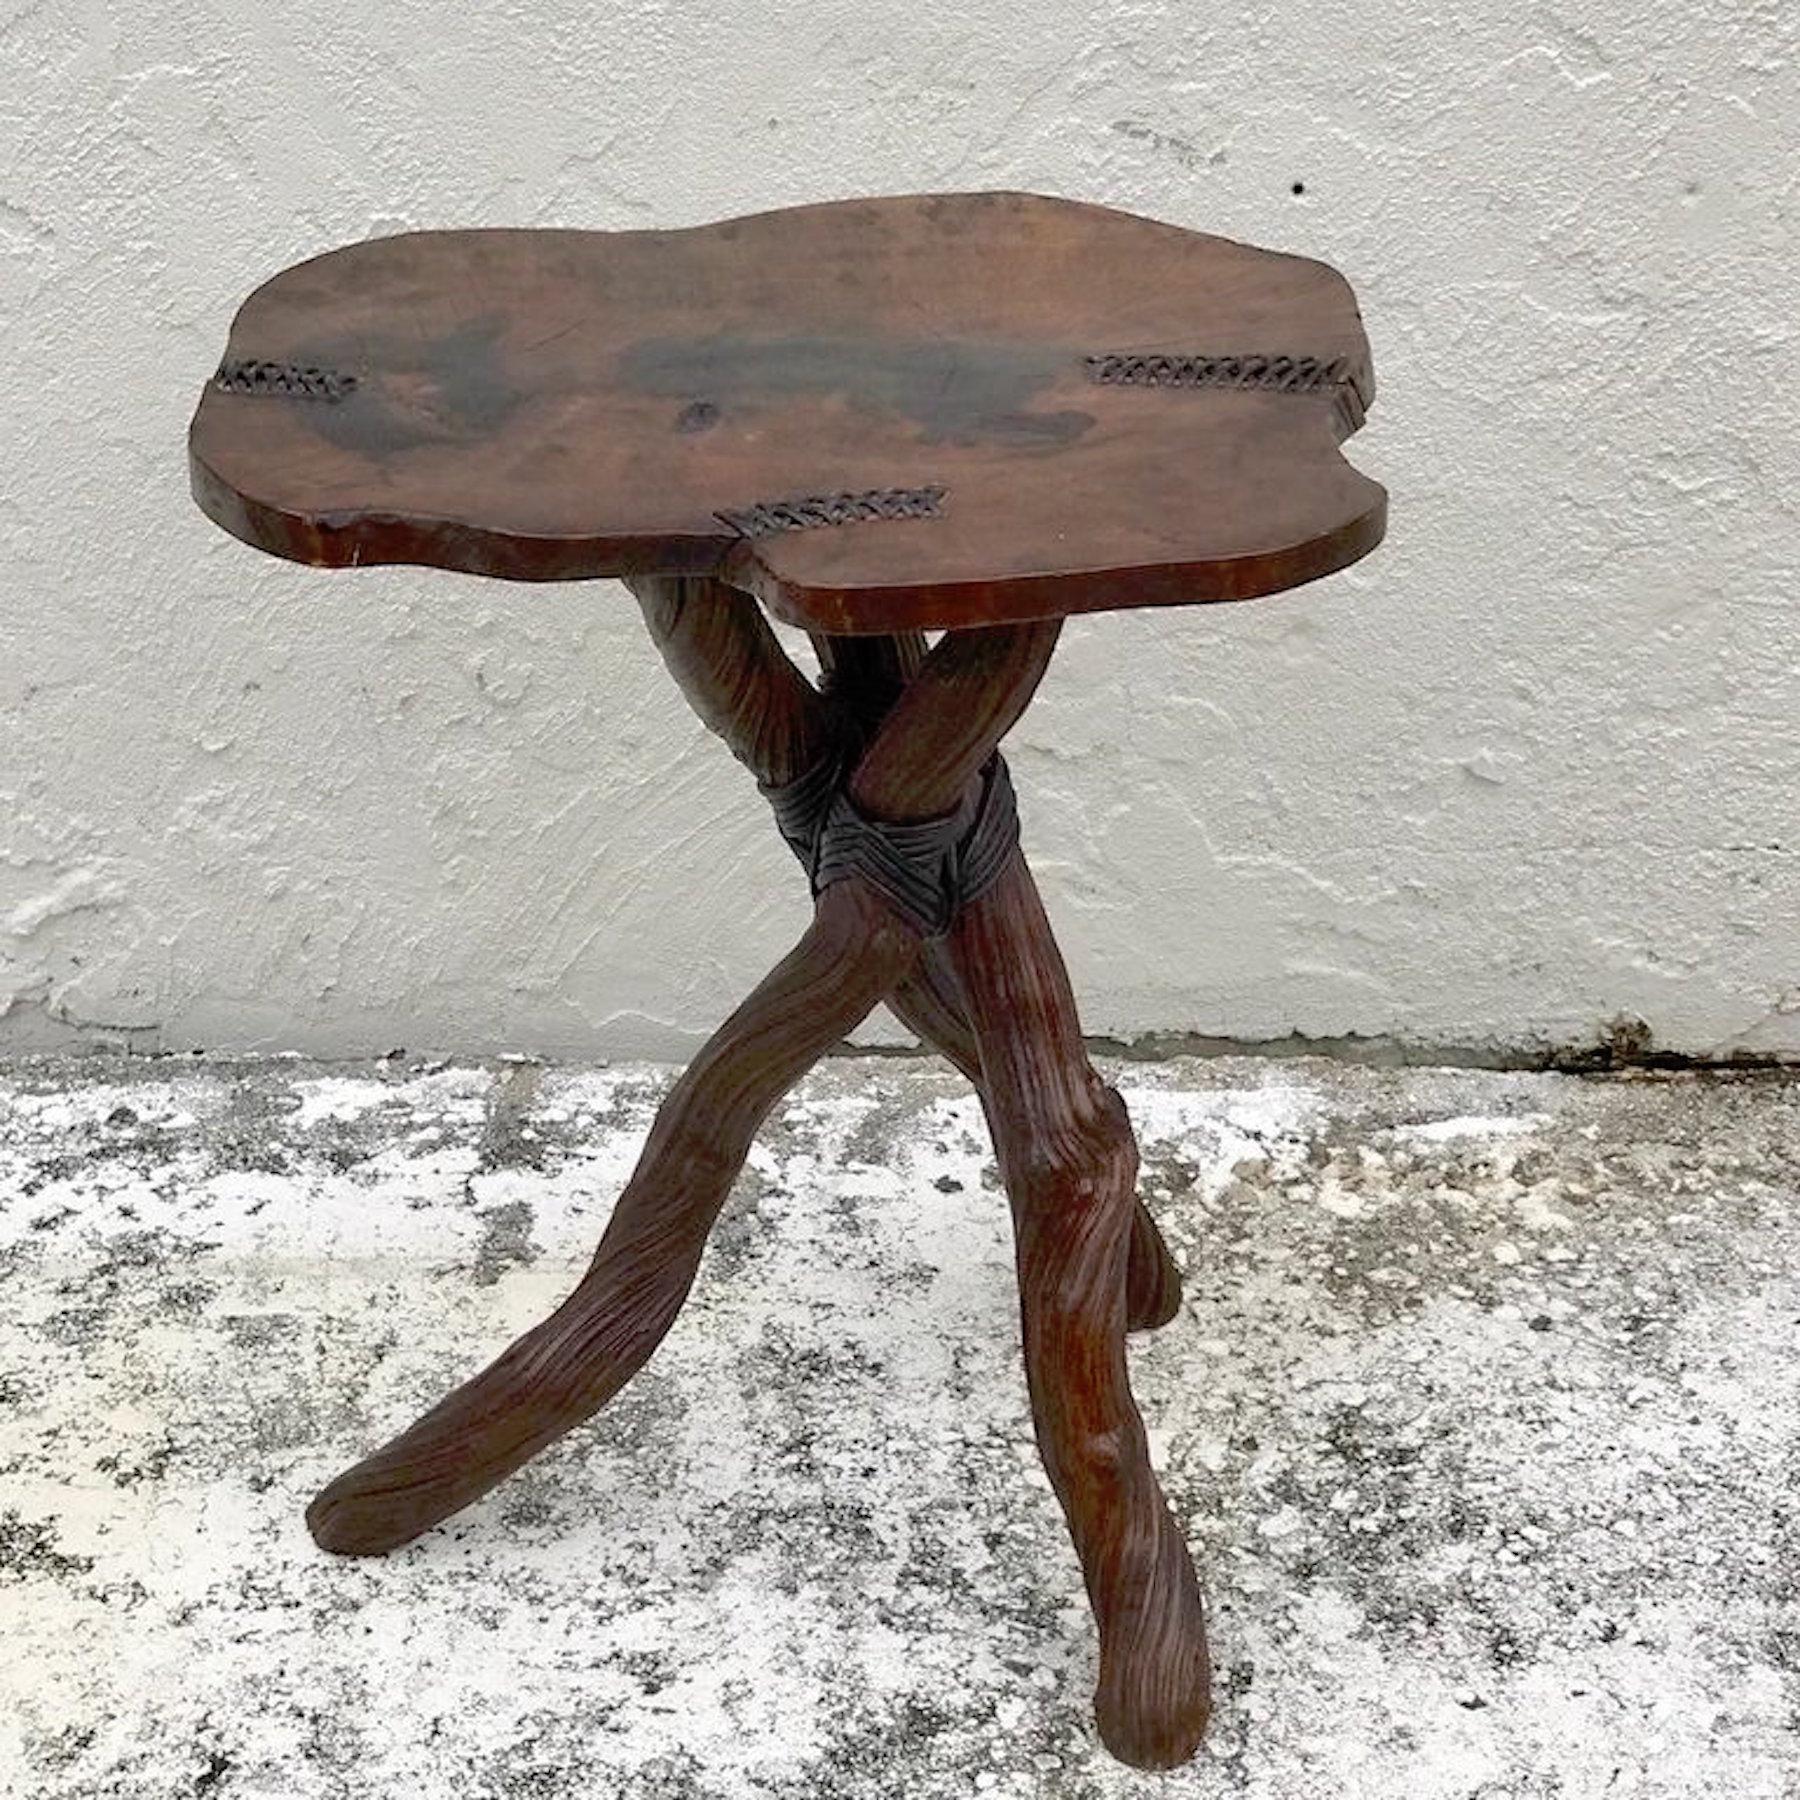 Artisan root table with leather, the live edge slab with sewn leather details, raised on leather wrapped root tripod base.
FREE LOCAL WHITE GLOVE SHIPPING -PALM BEACH to MIAMI 